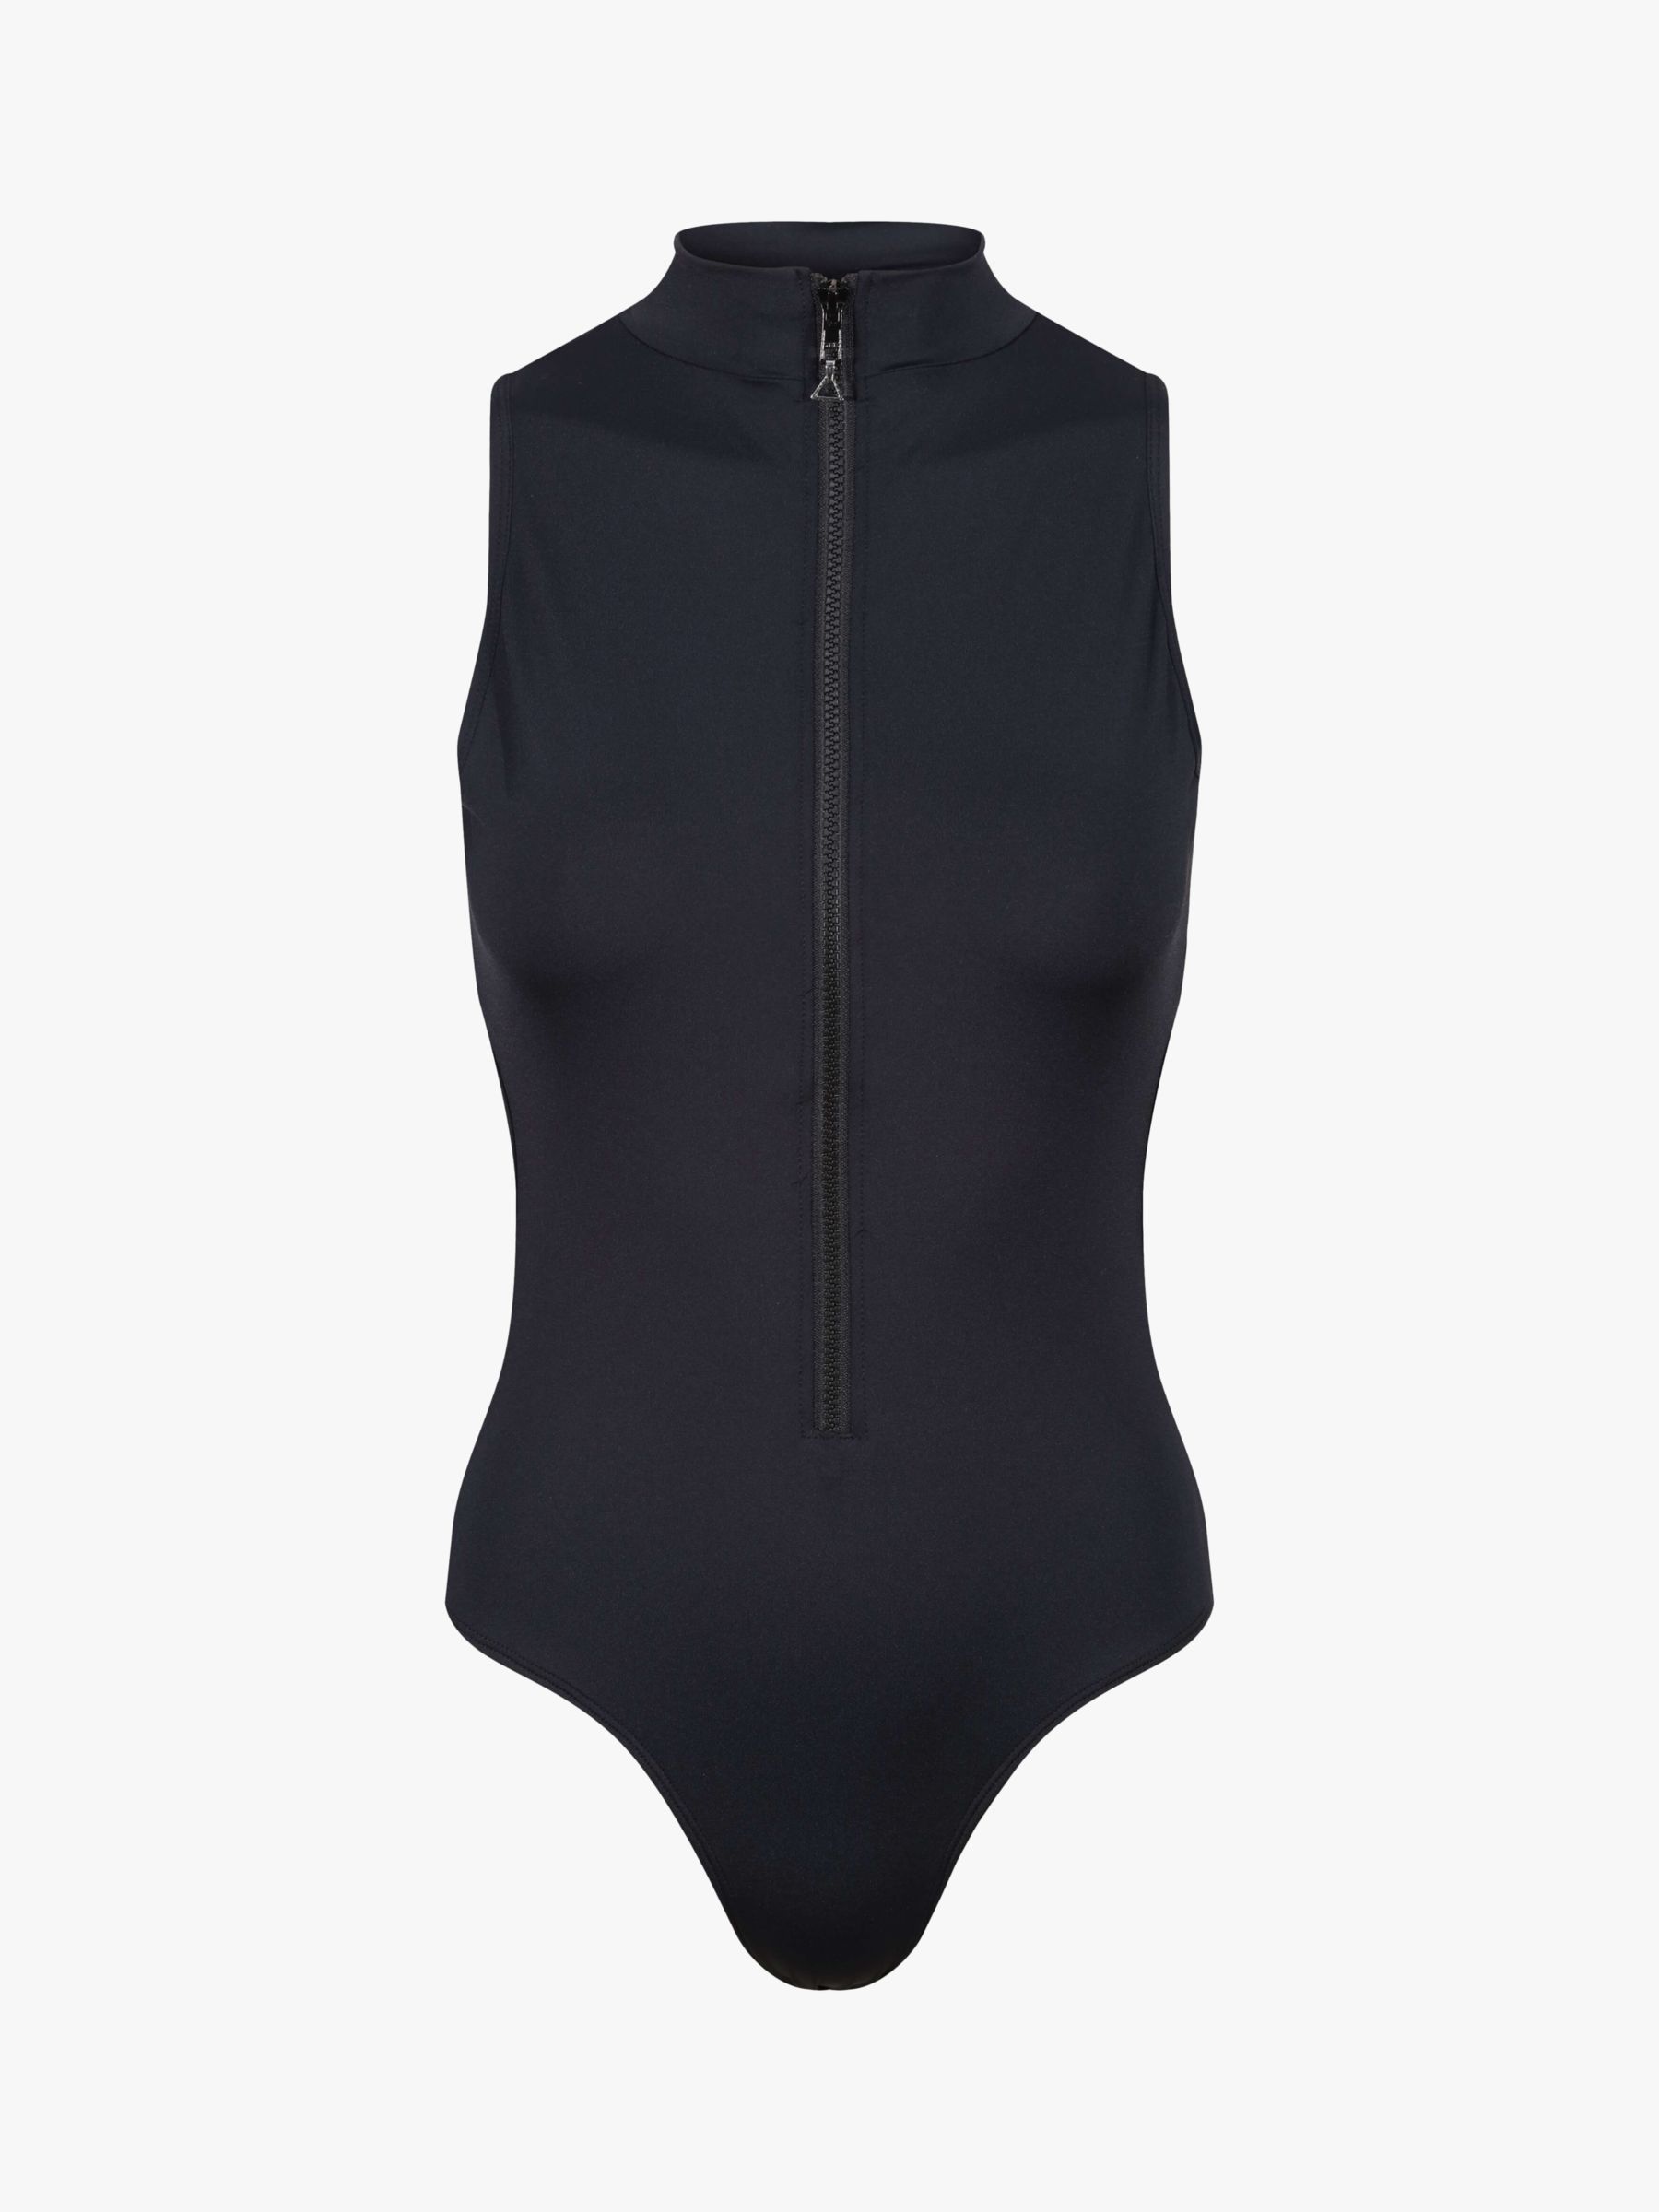 Davy J The Power Cut Out Swimsuit, Black, 18